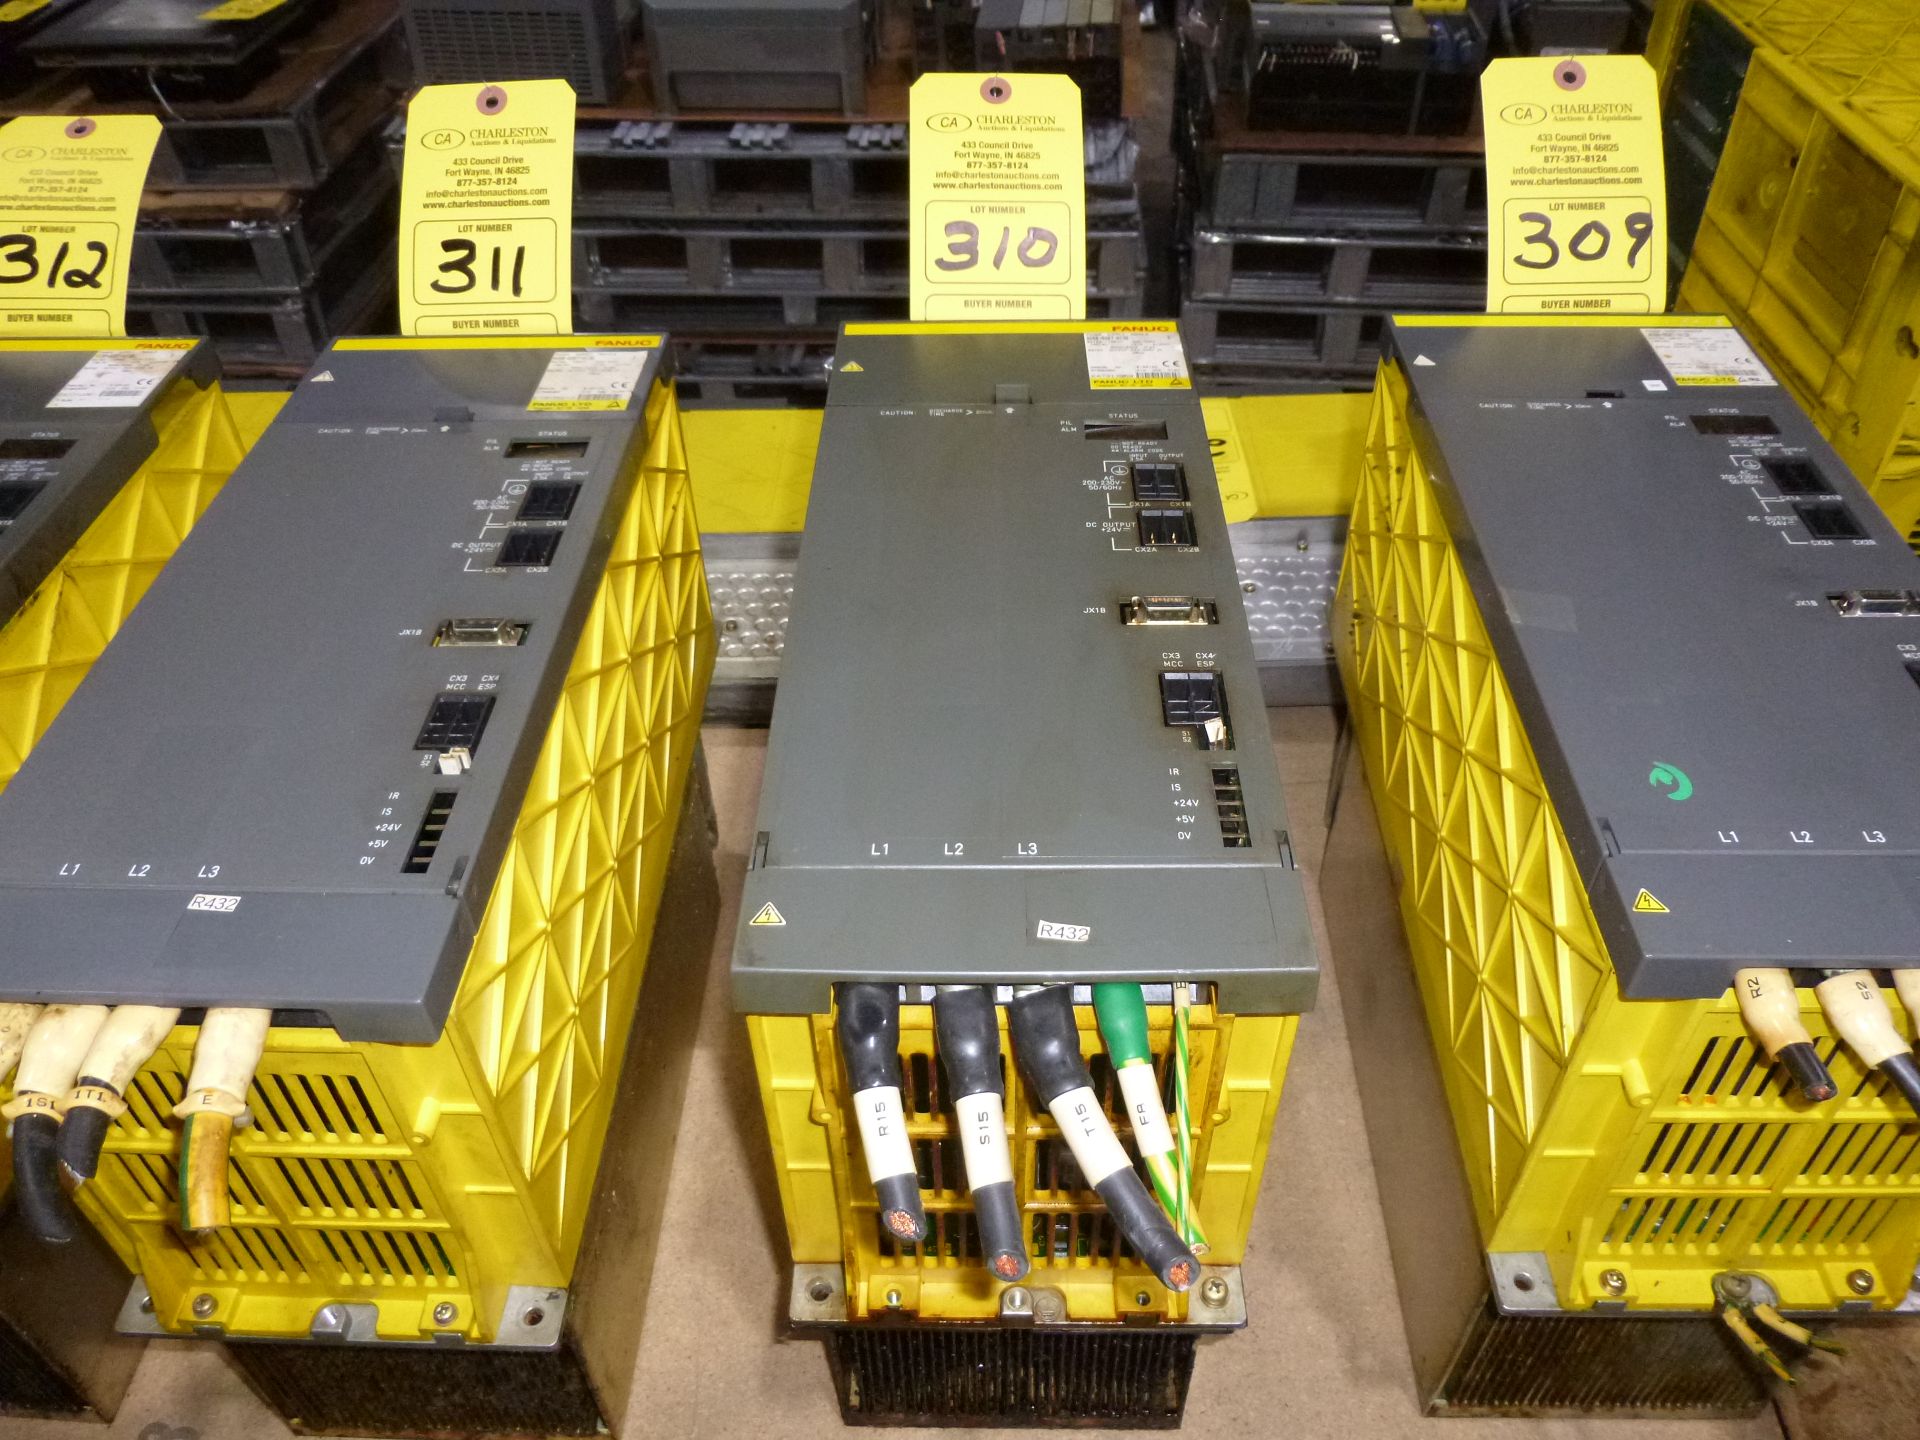 Fanuc power supply module model A06B-6087-H130, as always with Brolyn LLC auctions, all lots can